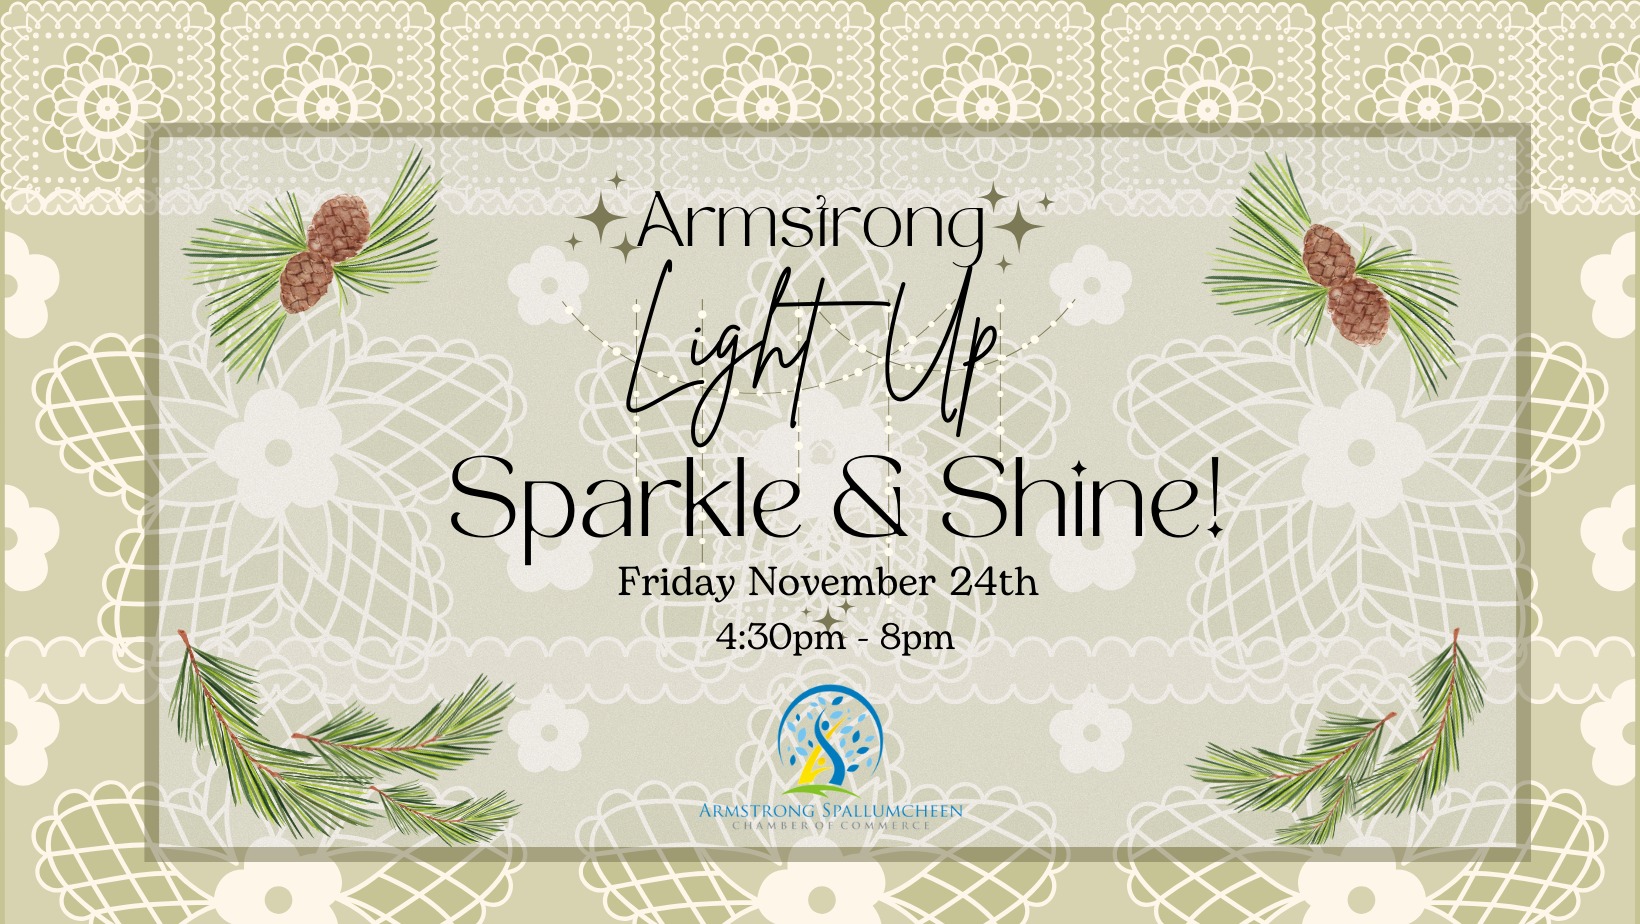 2023 Sparkle & Shine Armstrong Light Up